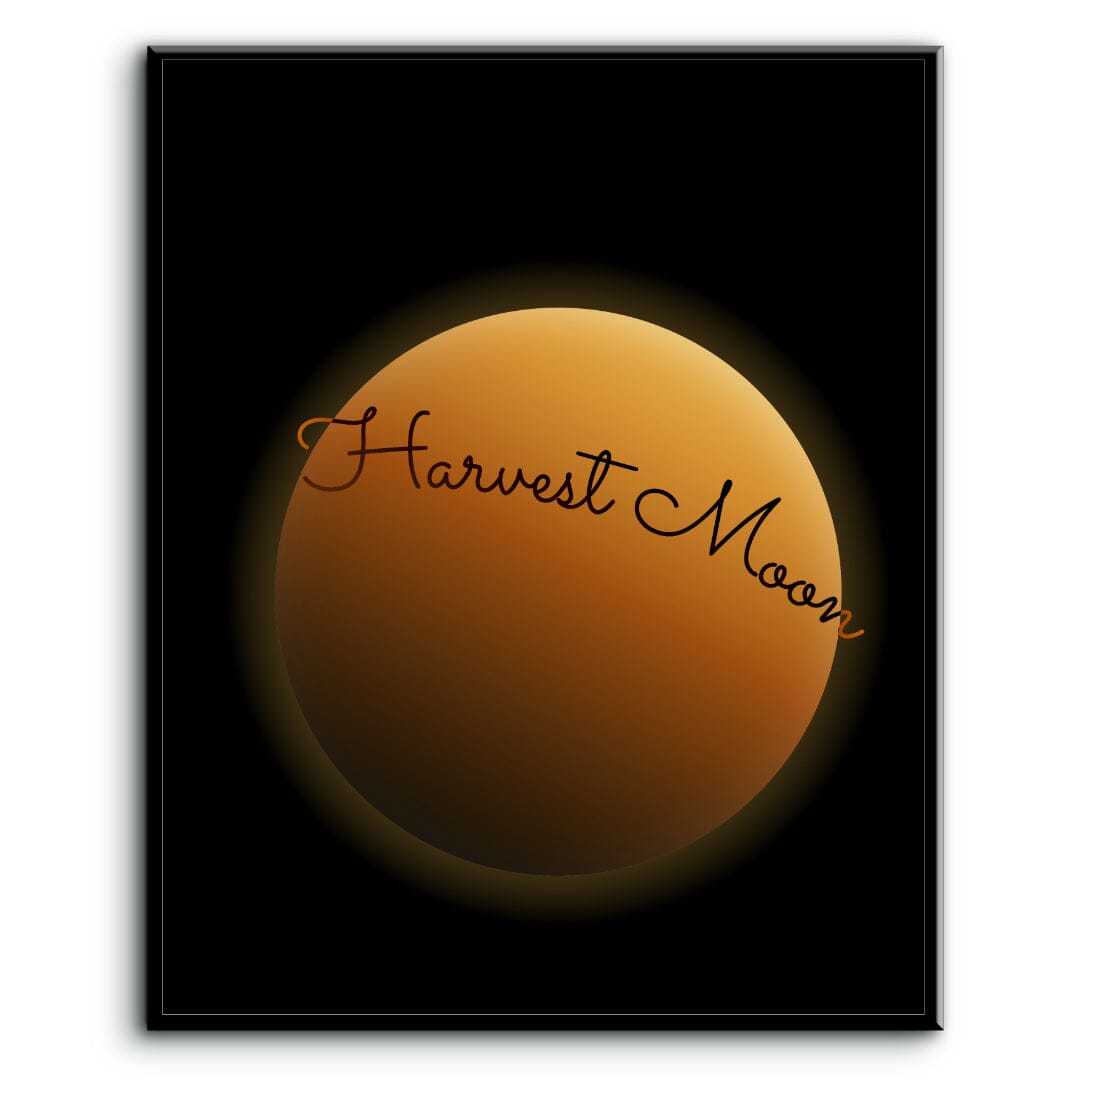 Harvest Moon by Neil Young - Music Song Lyric Print Artwork Song Lyrics Art Song Lyrics Art 8x10 Plaque Mount 